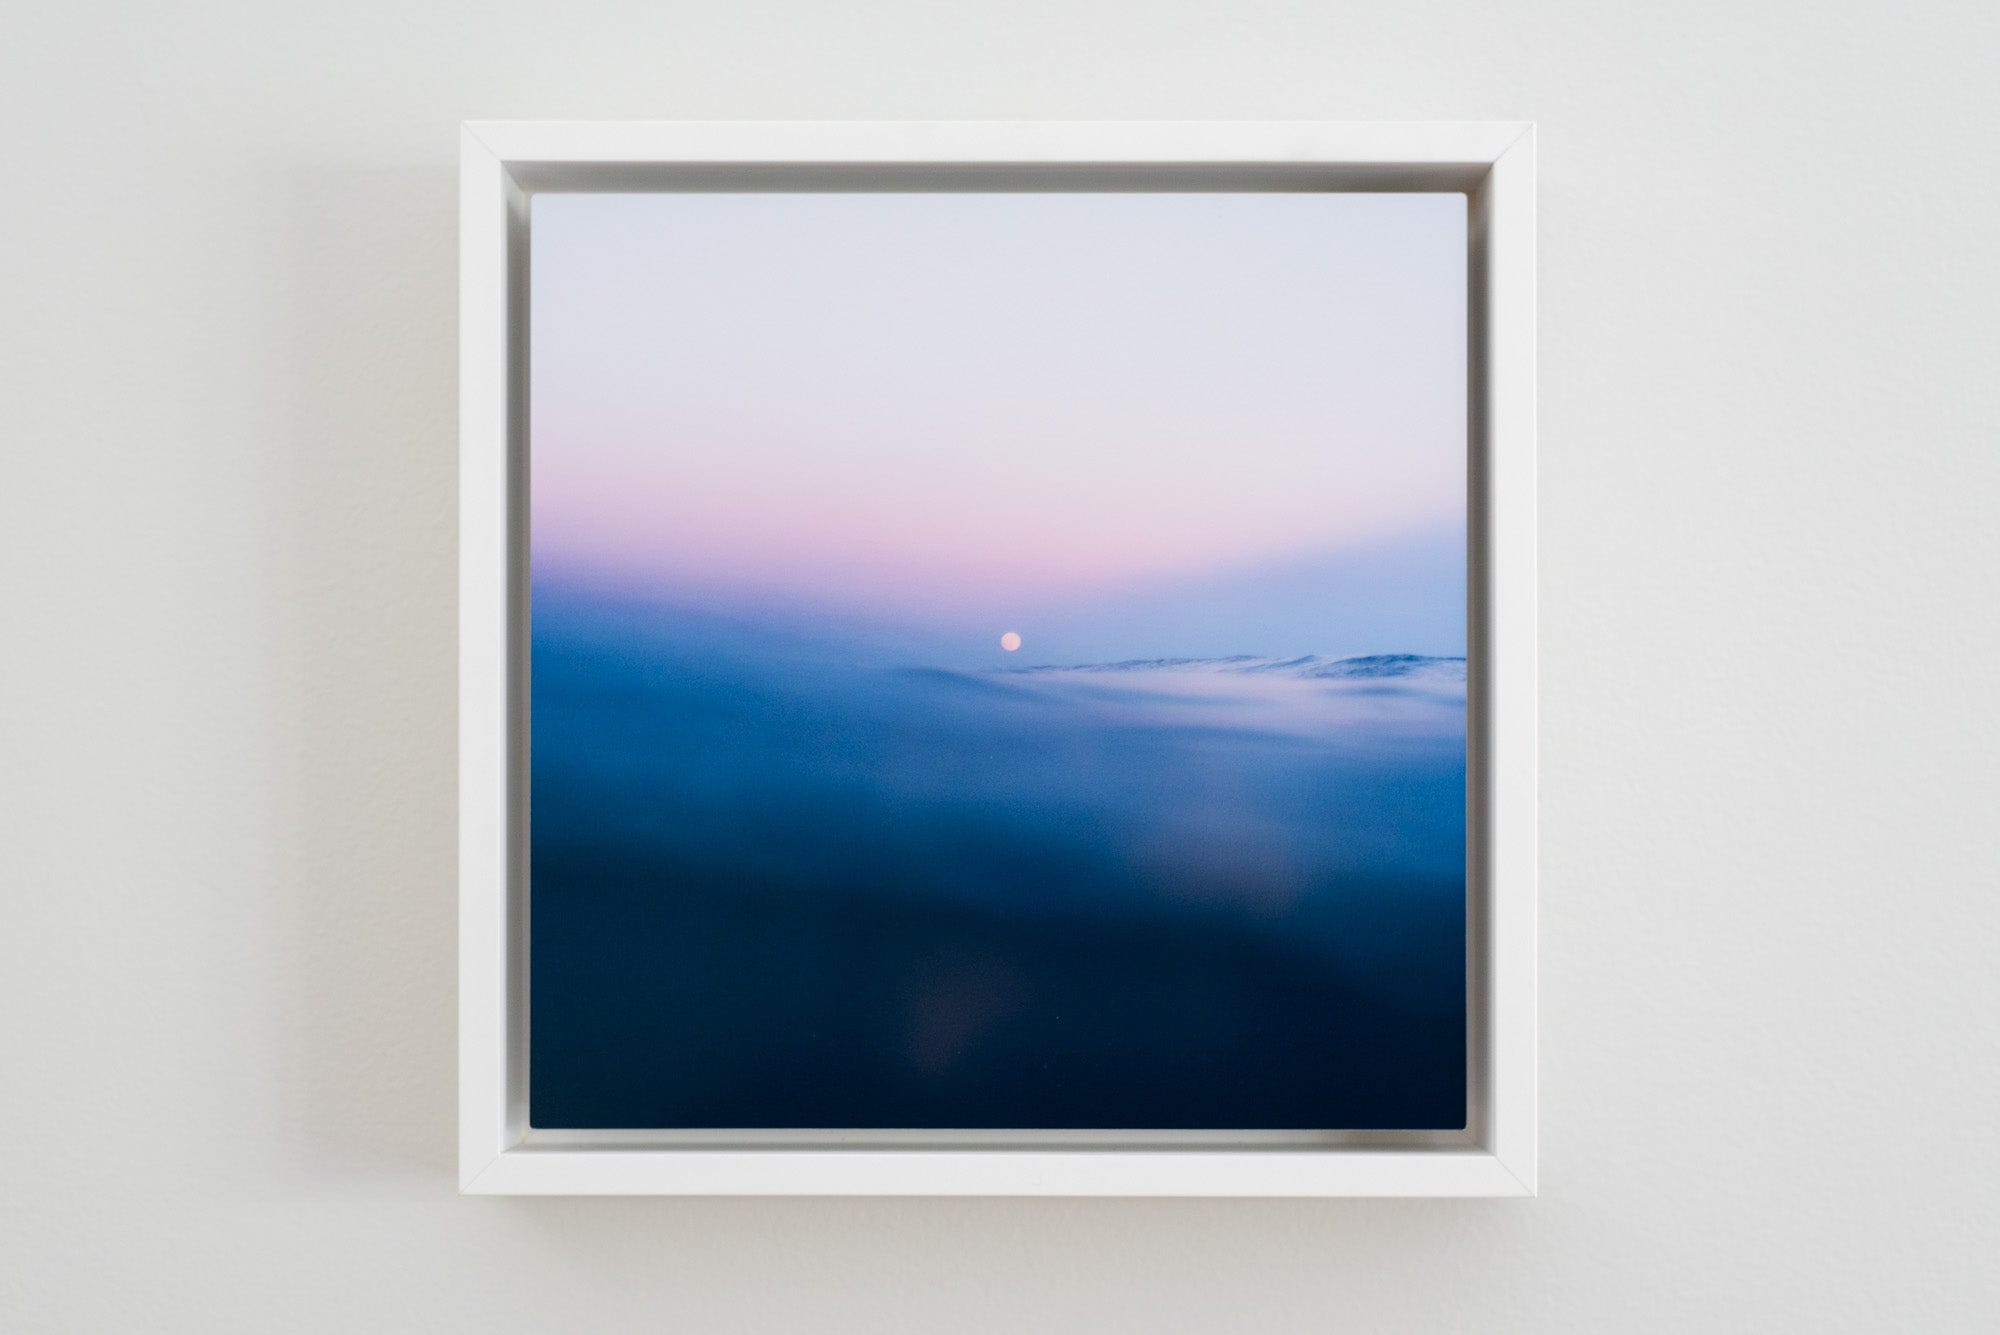 Cate Brown Photo Moonrise Kingdom Ocean Textures // Framed Metal Print 10x10" // MULTIPLE Available Available Inventory Ocean Fine Art